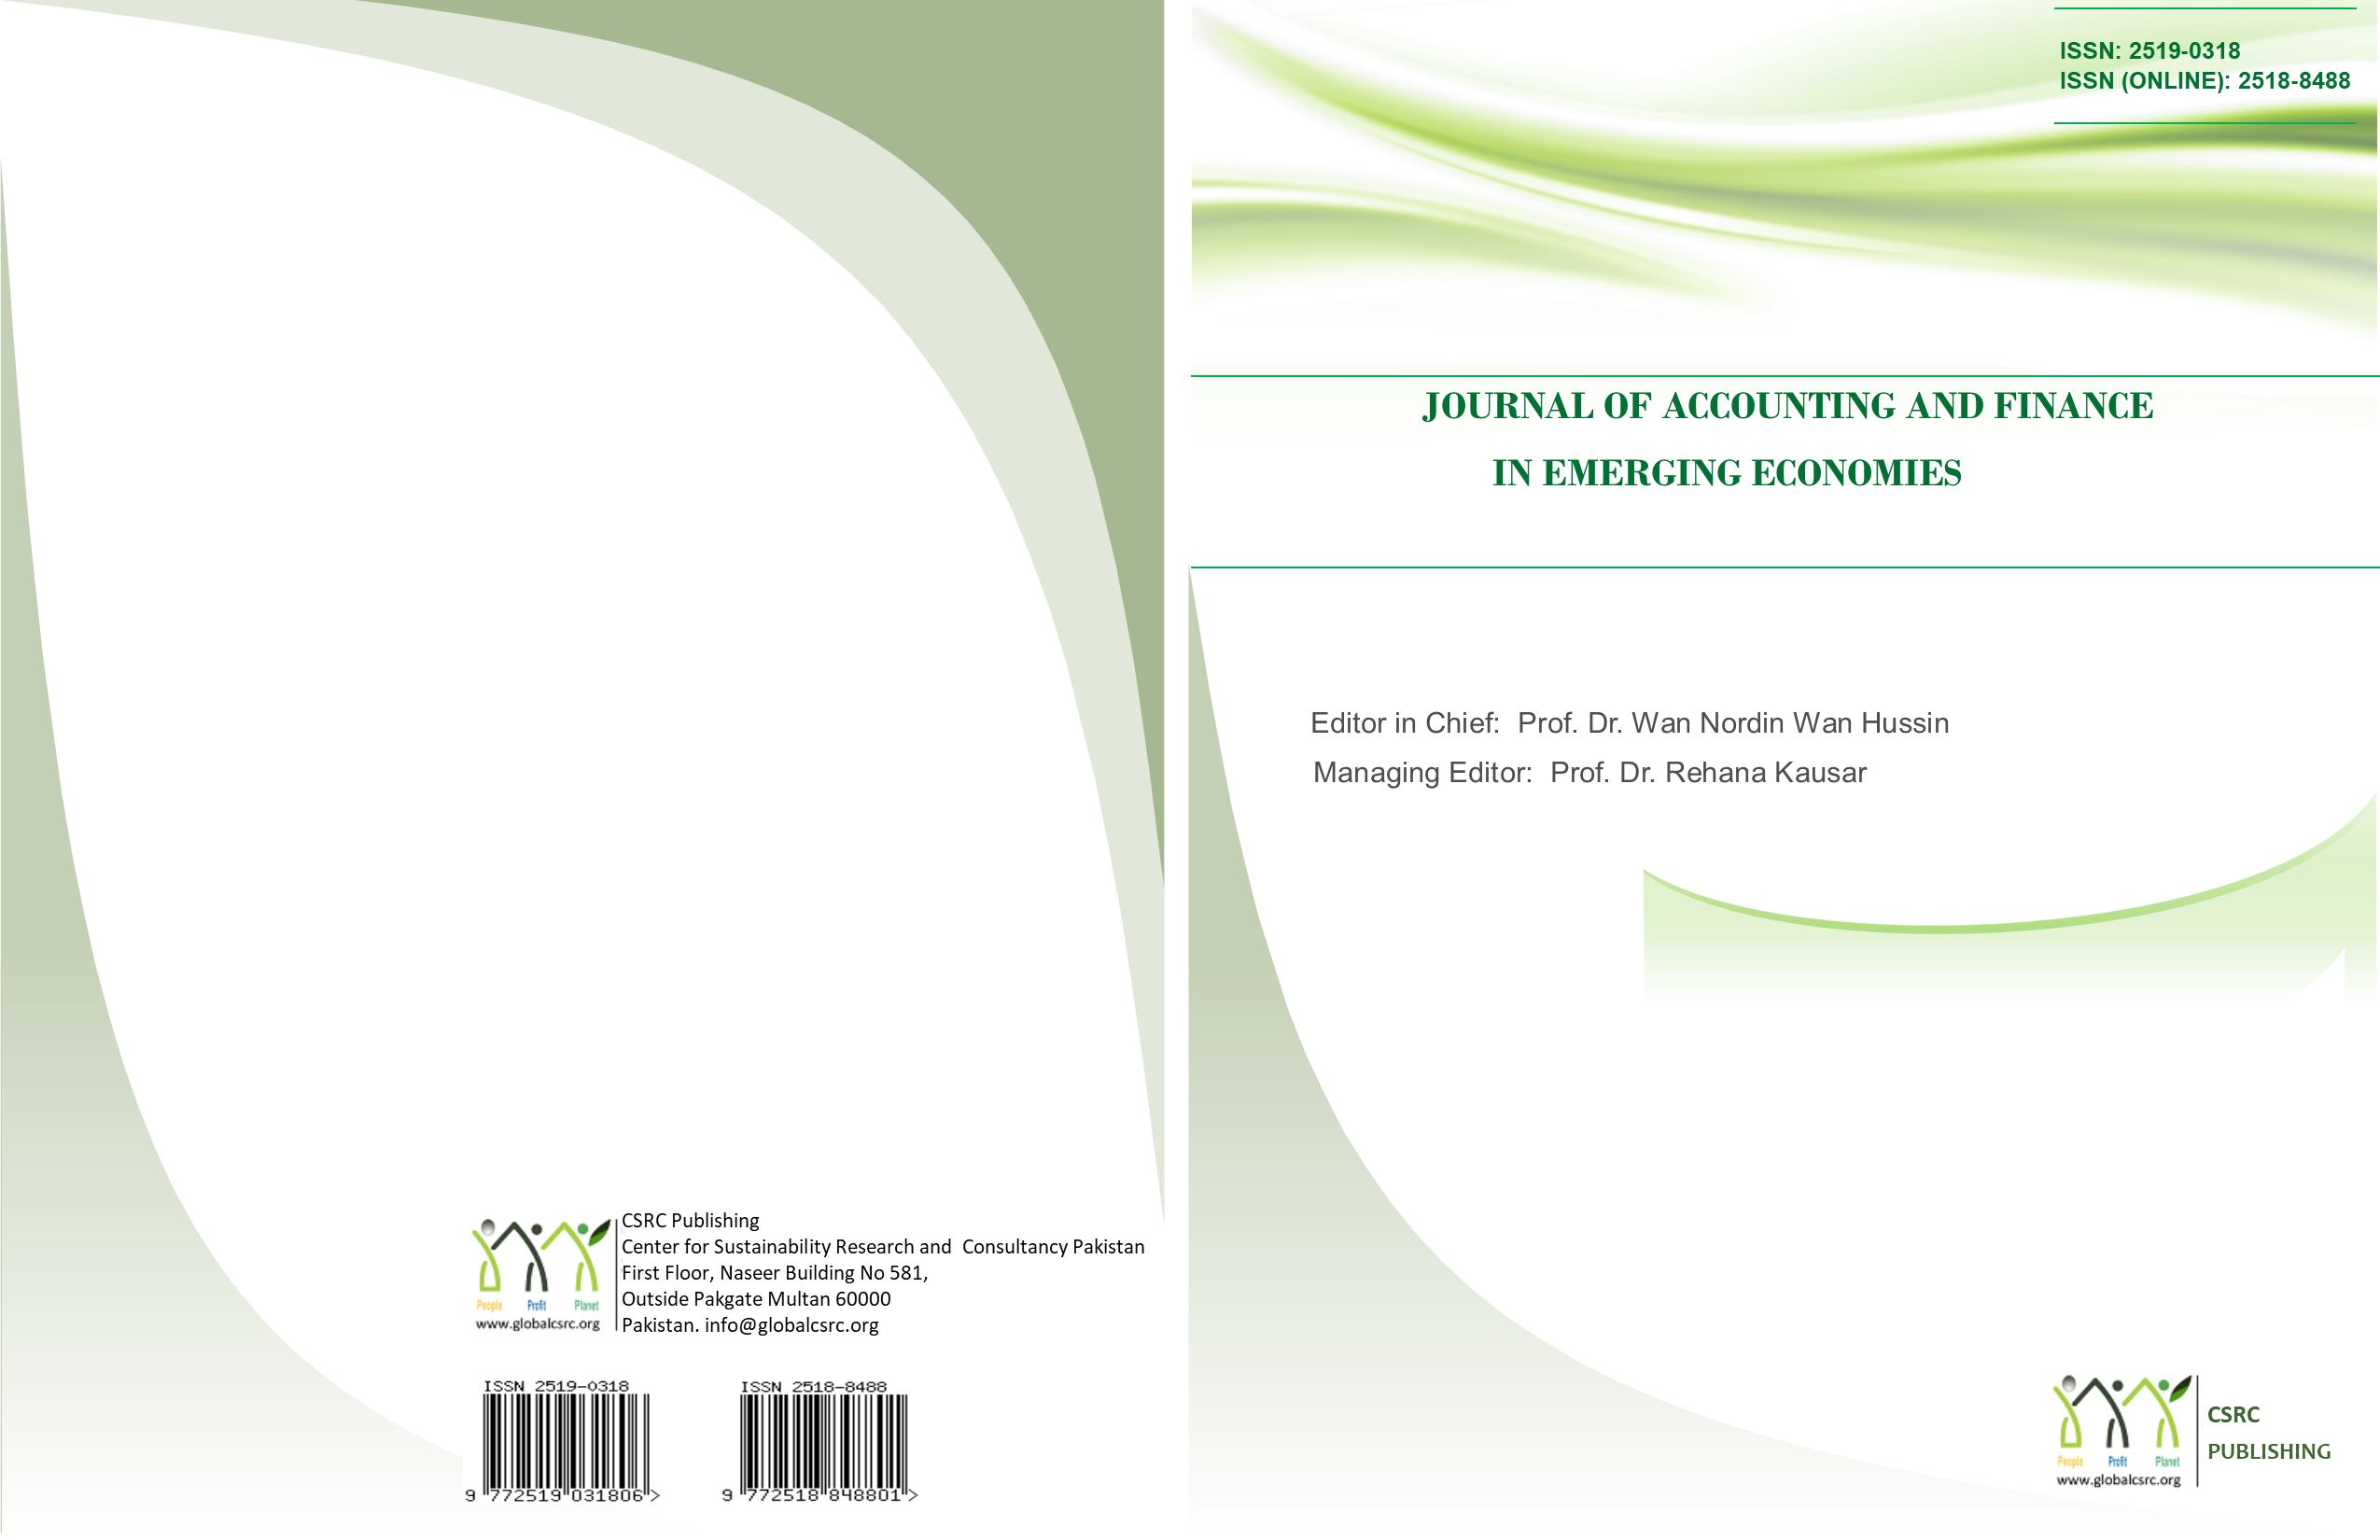 Journal of Accounting and Finance in Emerging Economies